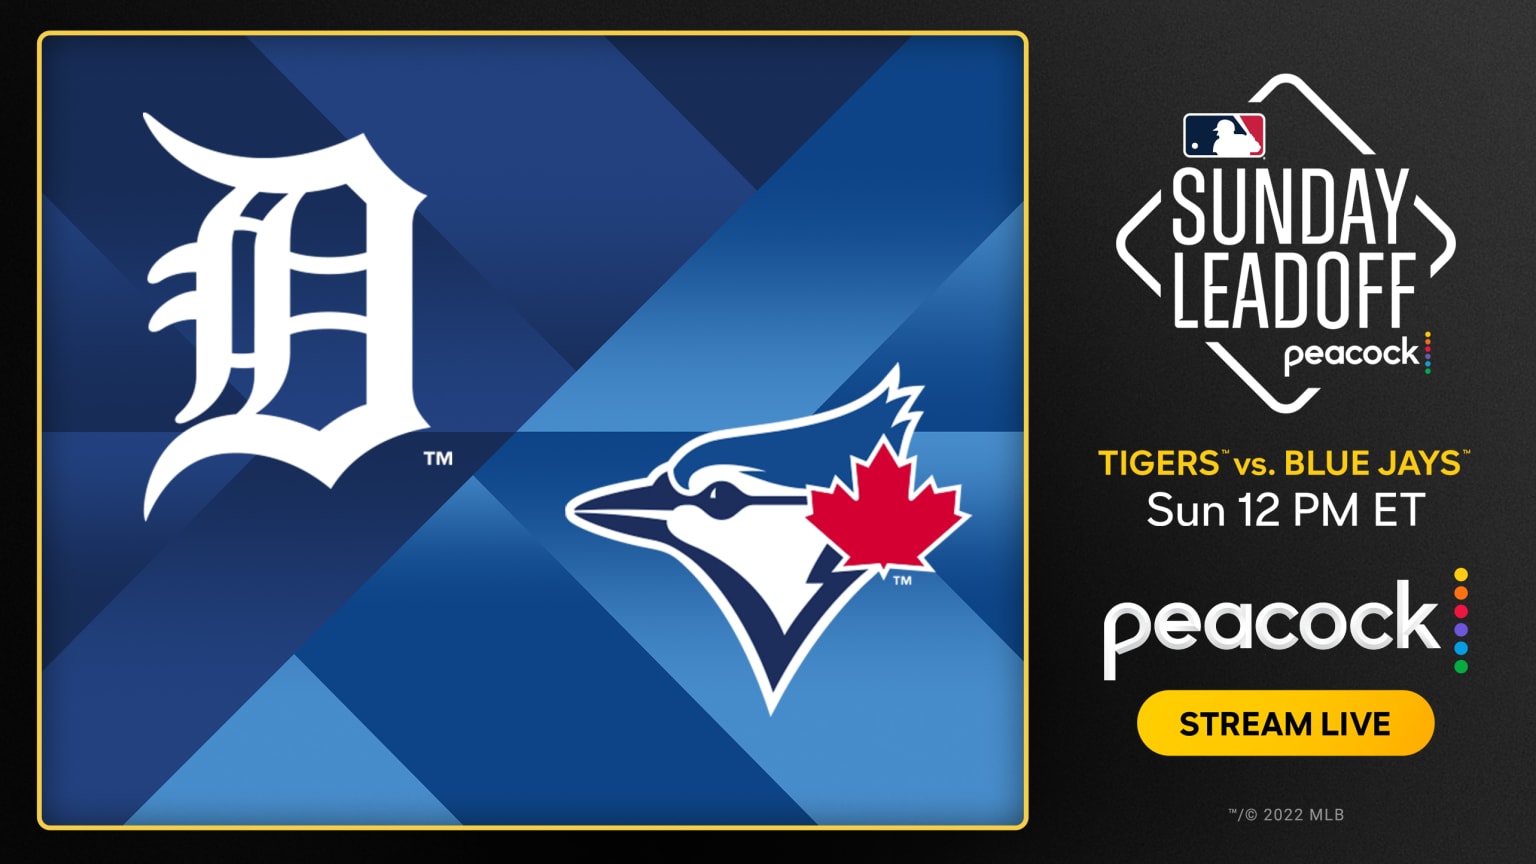 On the left, the Tigers and Blue Jays logos on a background of diagonal blue shapes in varying shades in a box; on the right is a Sunday Leadoff Peacock logo above the words ''Tigers vs. Blue Jays, Sunday, 12 p.m. ET''